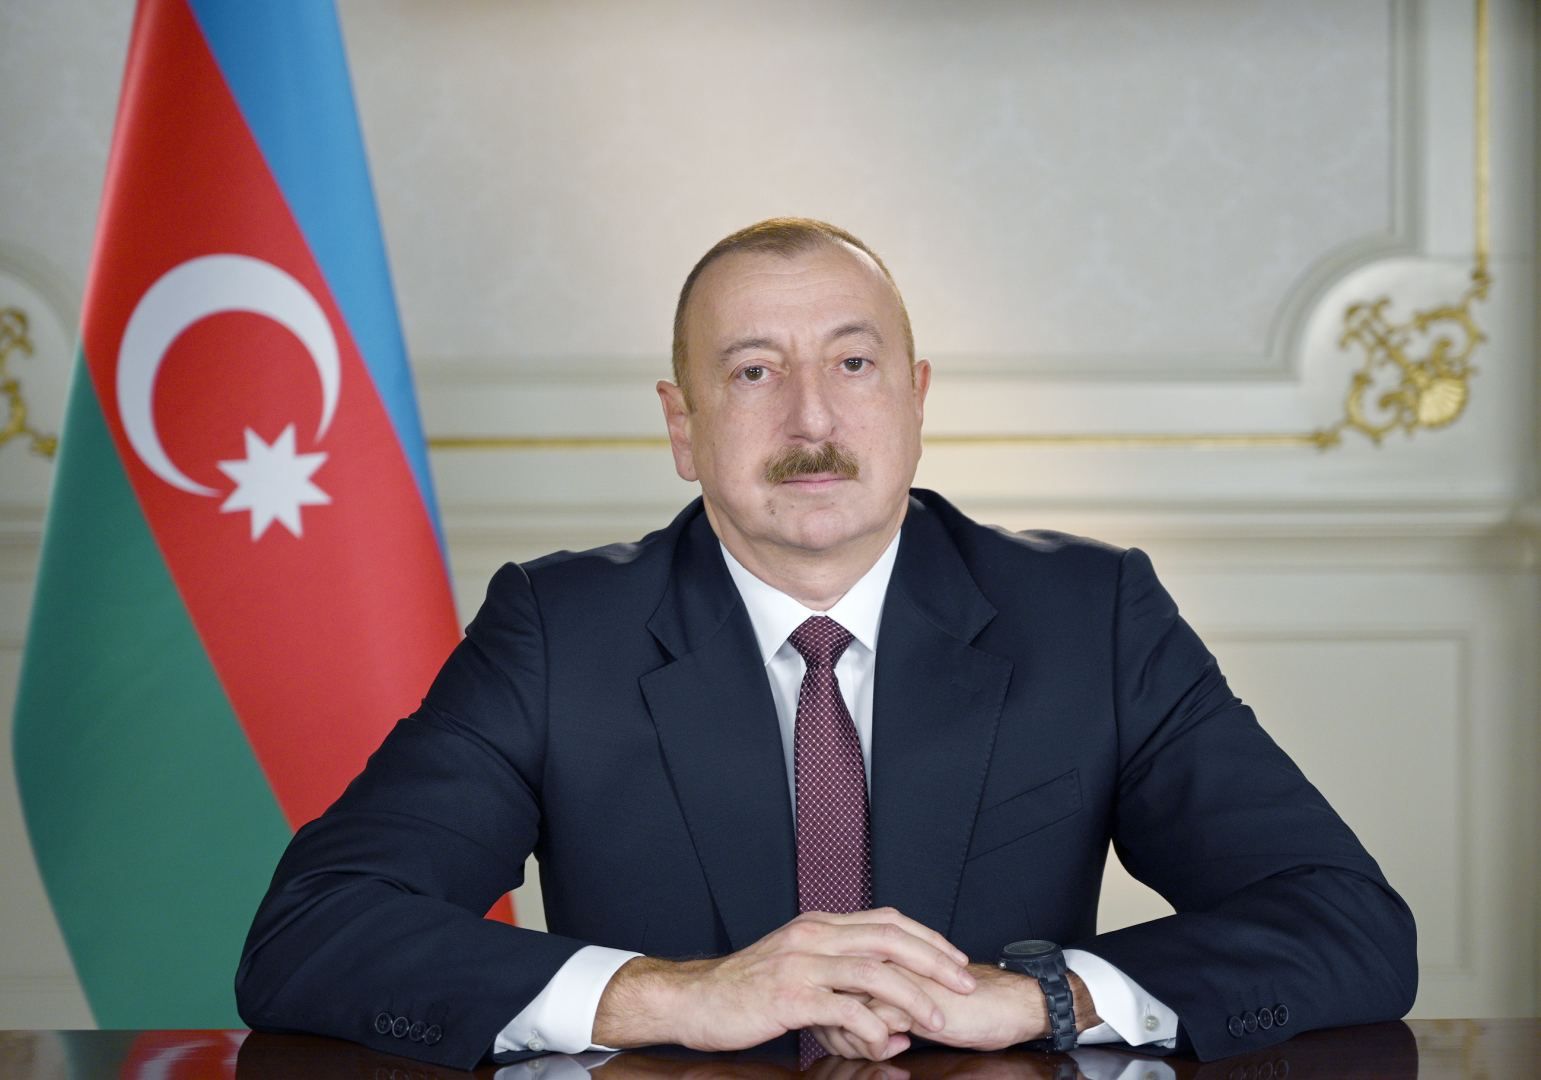 Azerbaijani President extends national holiday greetings to King of Sweden